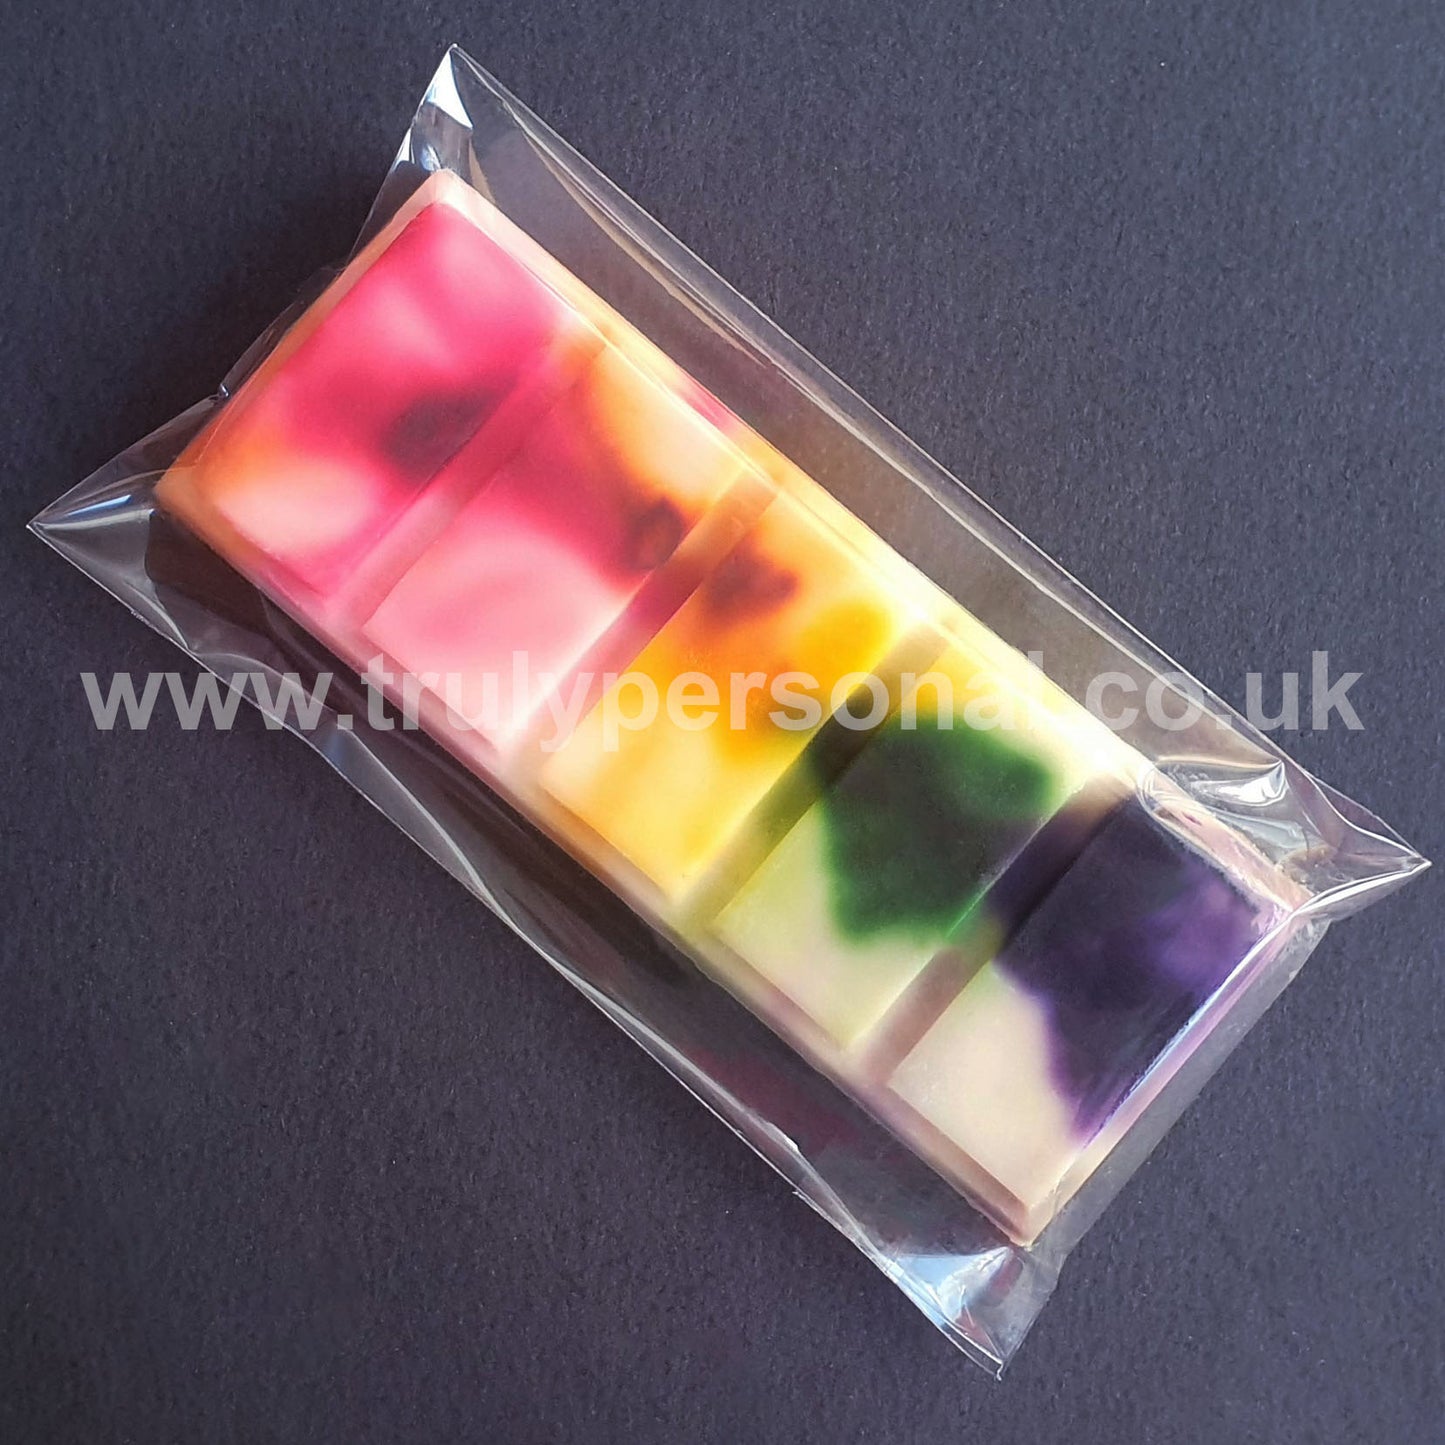 Wax Snap Bar Cello Bags | 65 x 125mm | Truly Personal